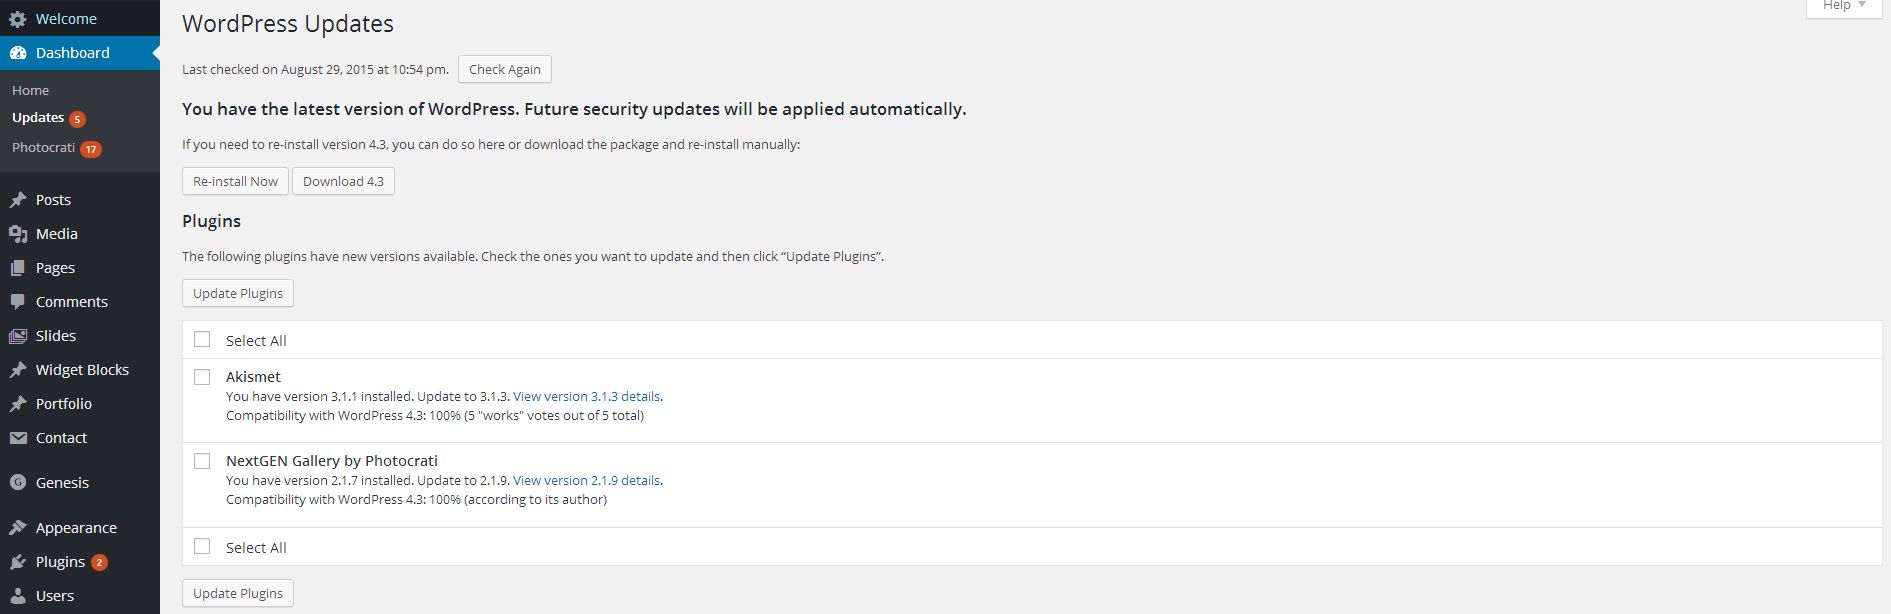 Plugins are were the most issues occur regarding updates. Make sure you have a back up of the previous version.